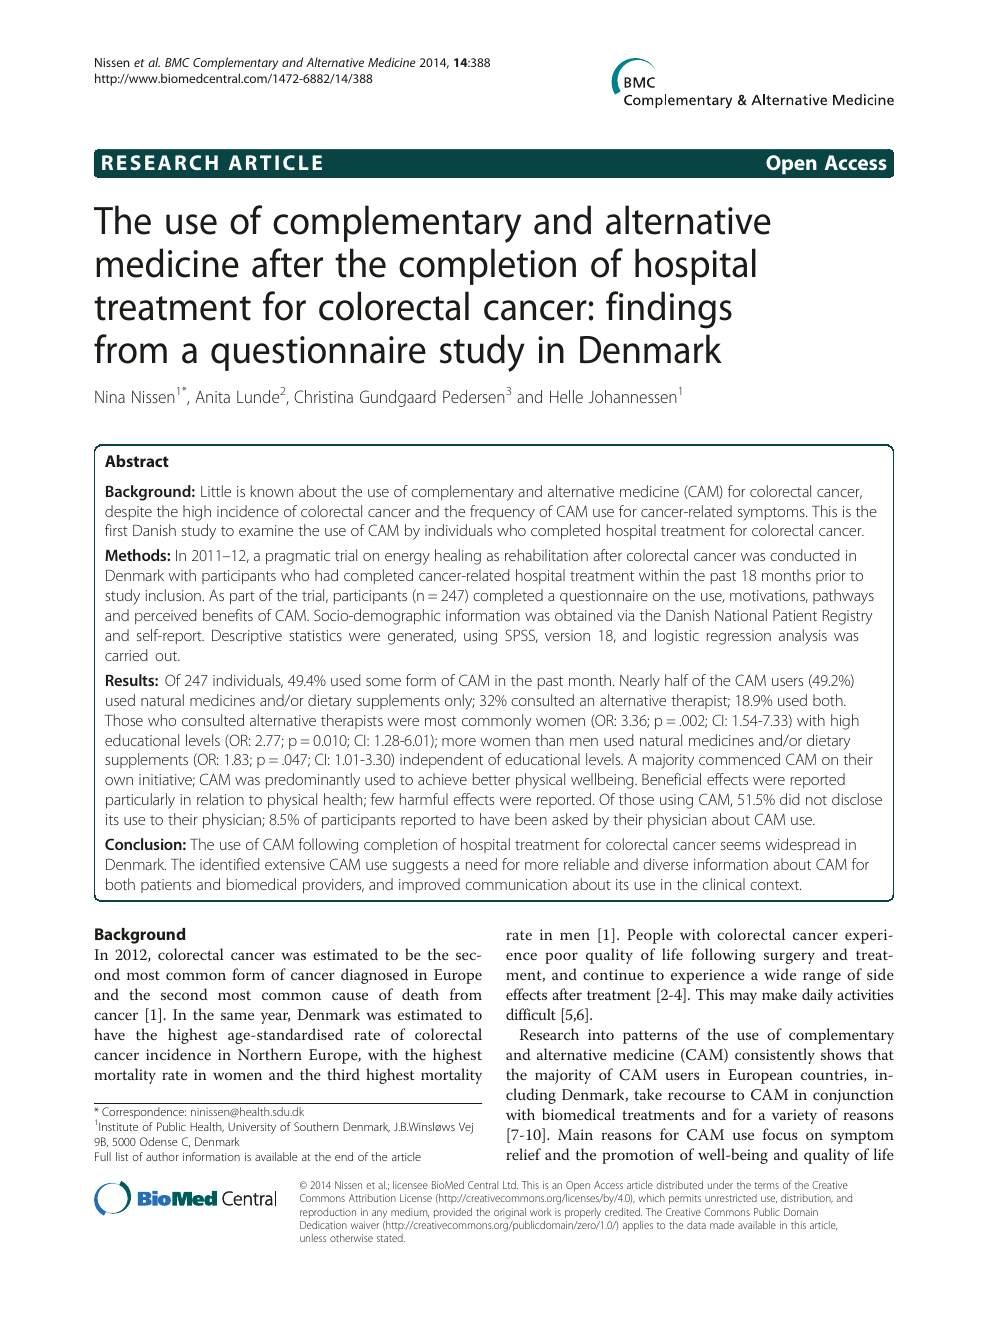 The use of complementary and alternative medicine after the completion of hospital treatment for colorectal cancer: findings from questionnaire study in Denmark – topic of research paper in Health sciences. Download